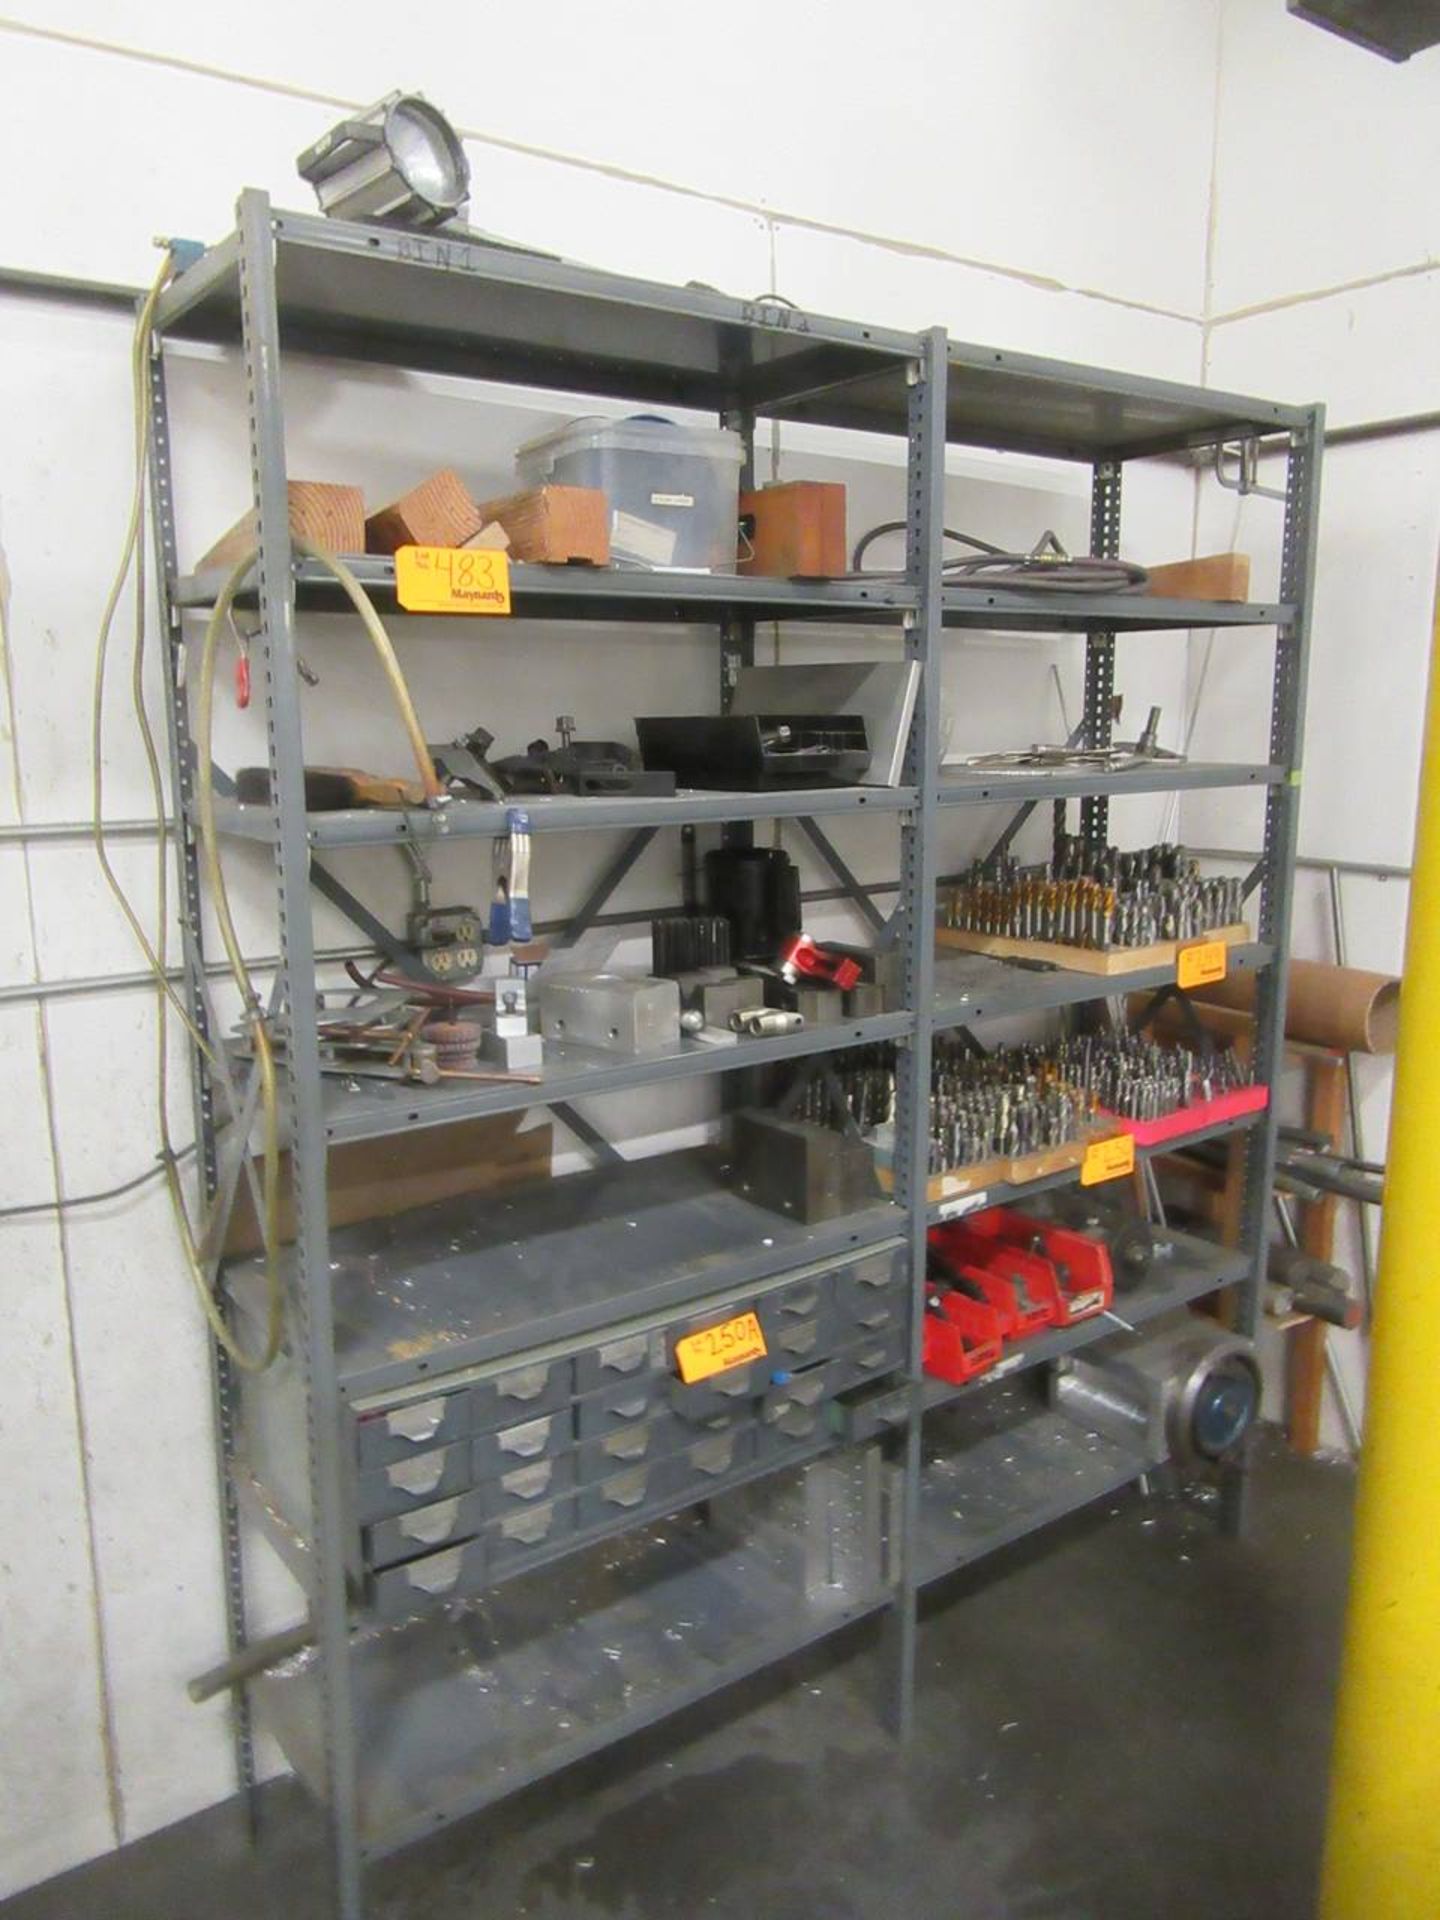 Shelving Unit with contents